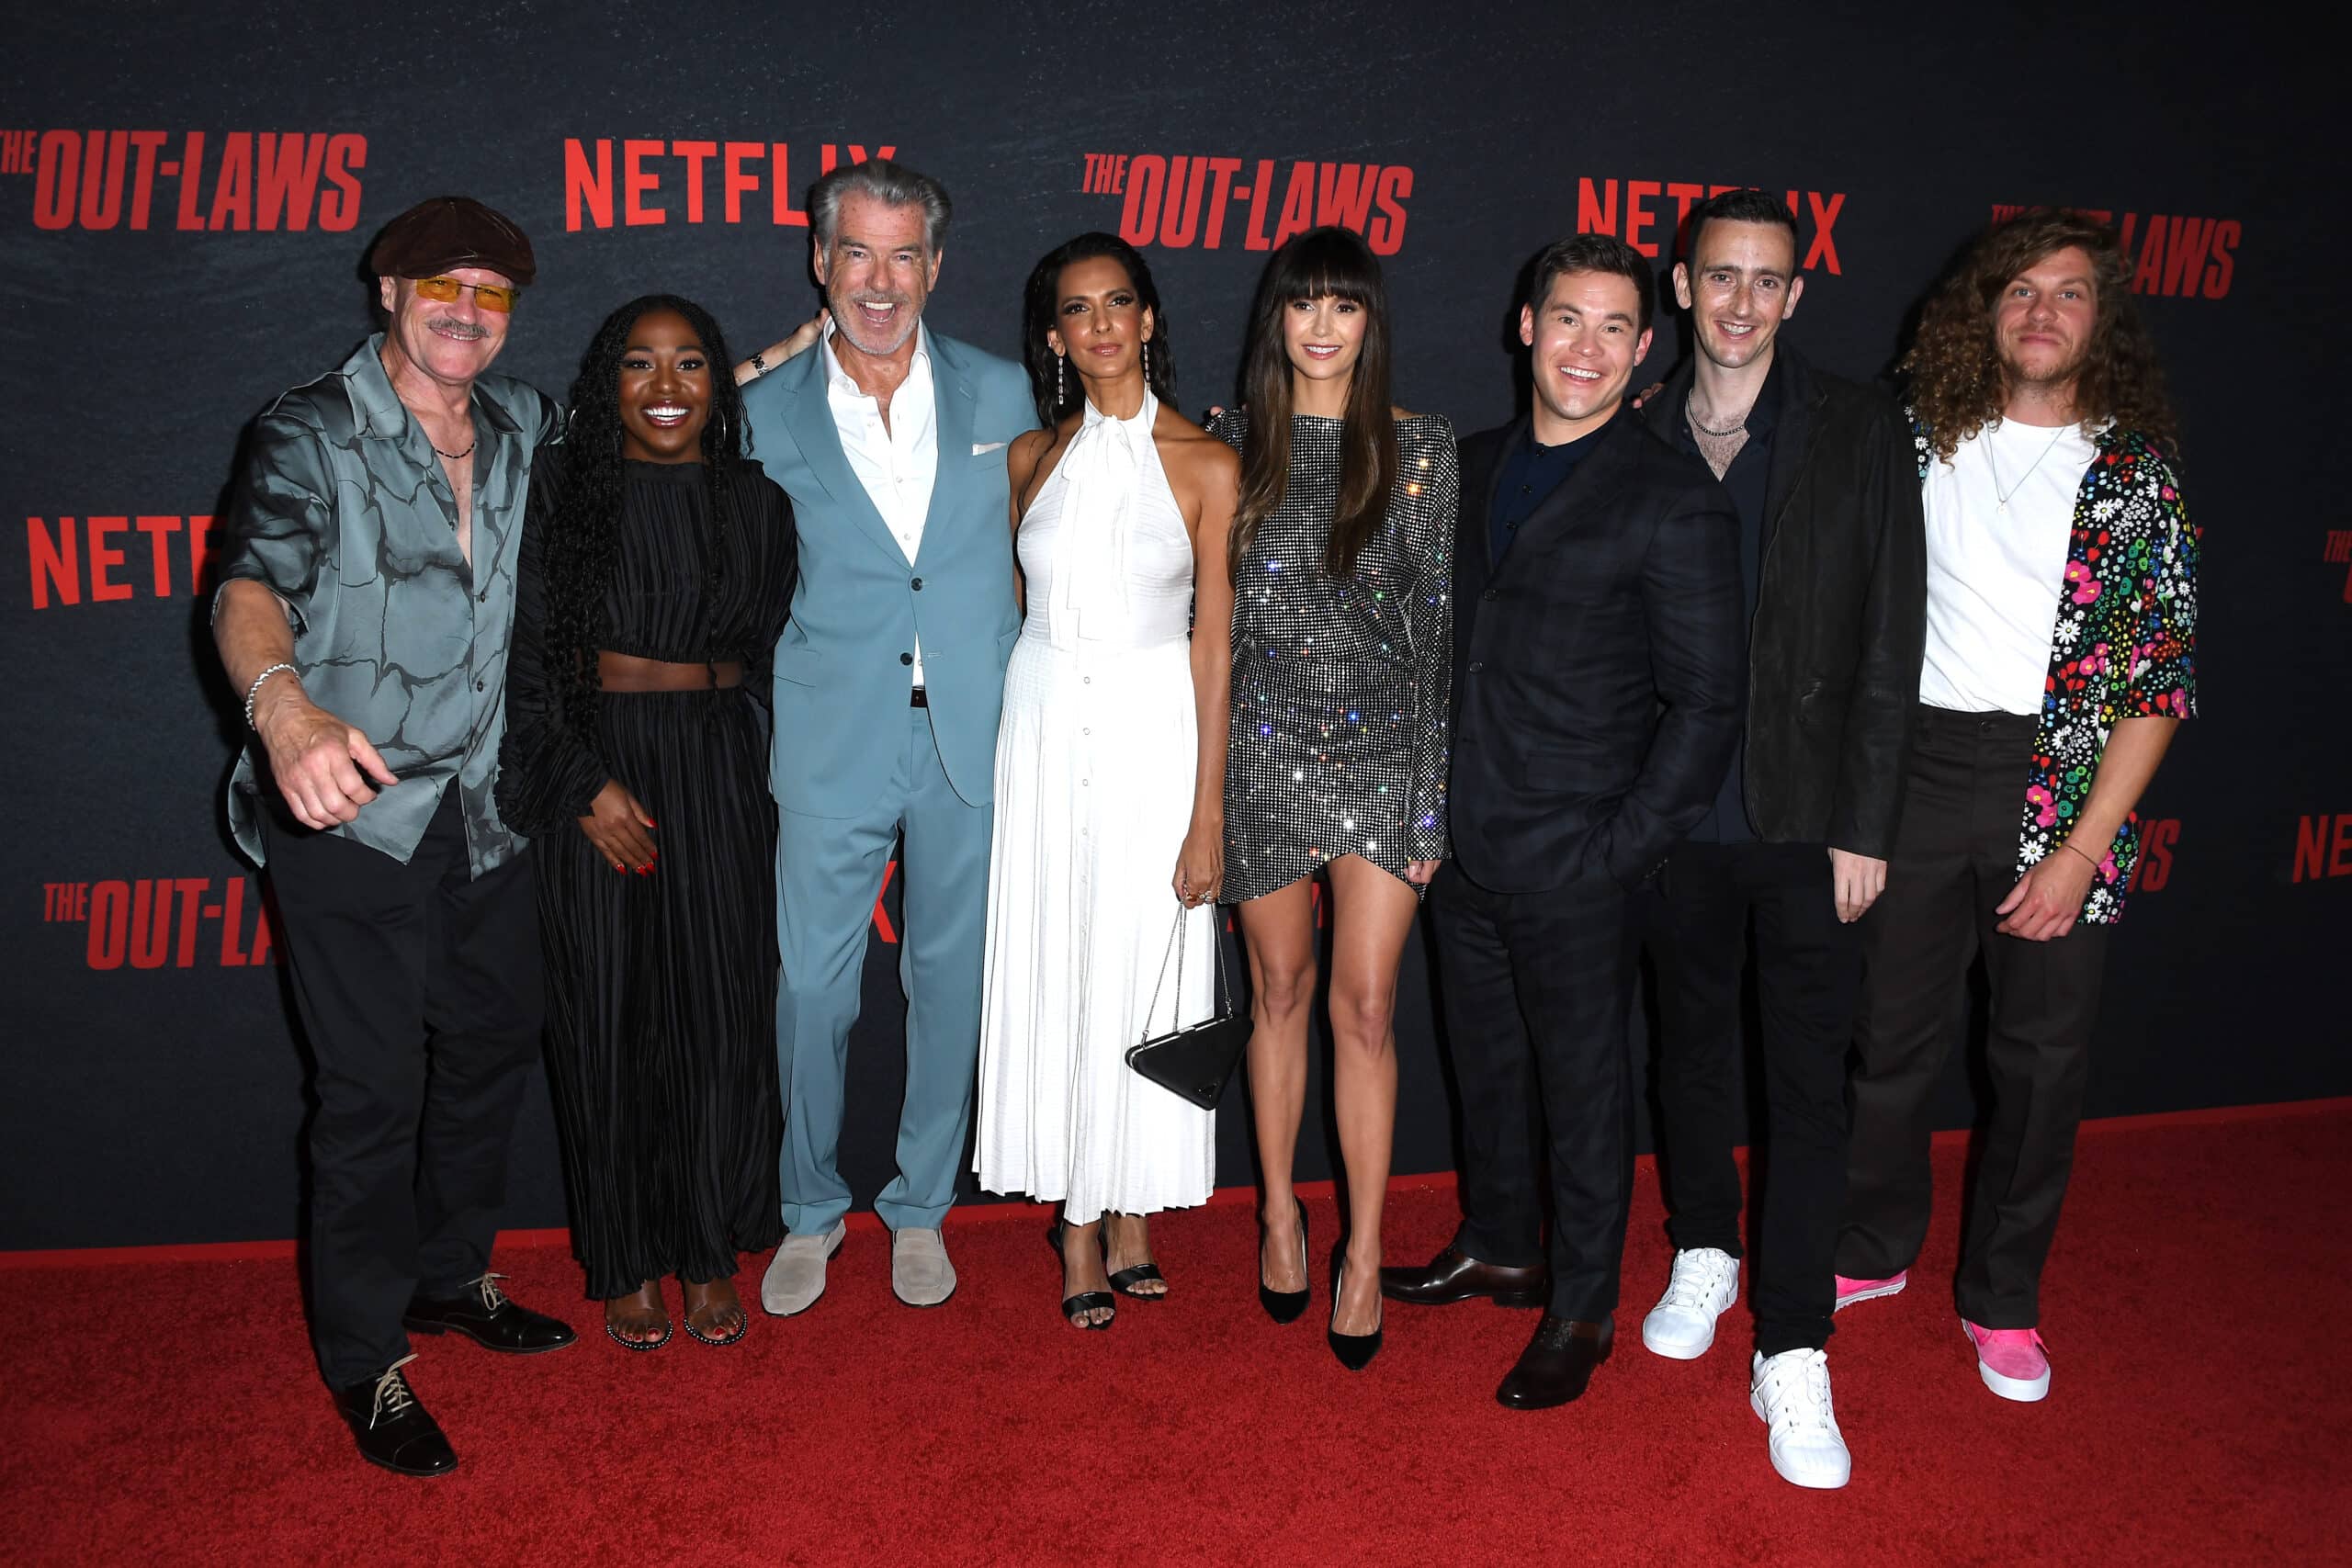 LOS ANGELES, CALIFORNIA - JUNE 26: Michael Rooker, Laci Mosley, Pierce Brosnan, Poorna Jagannathan, Nina Dobrev, Adam DeVine, Tyler Spindel and Blake Anderson arrives at the Los Angeles Premiere Of Netflix's "The Out-Laws" at Regal LA Live on June 26, 2023 in Los Angeles, California. 